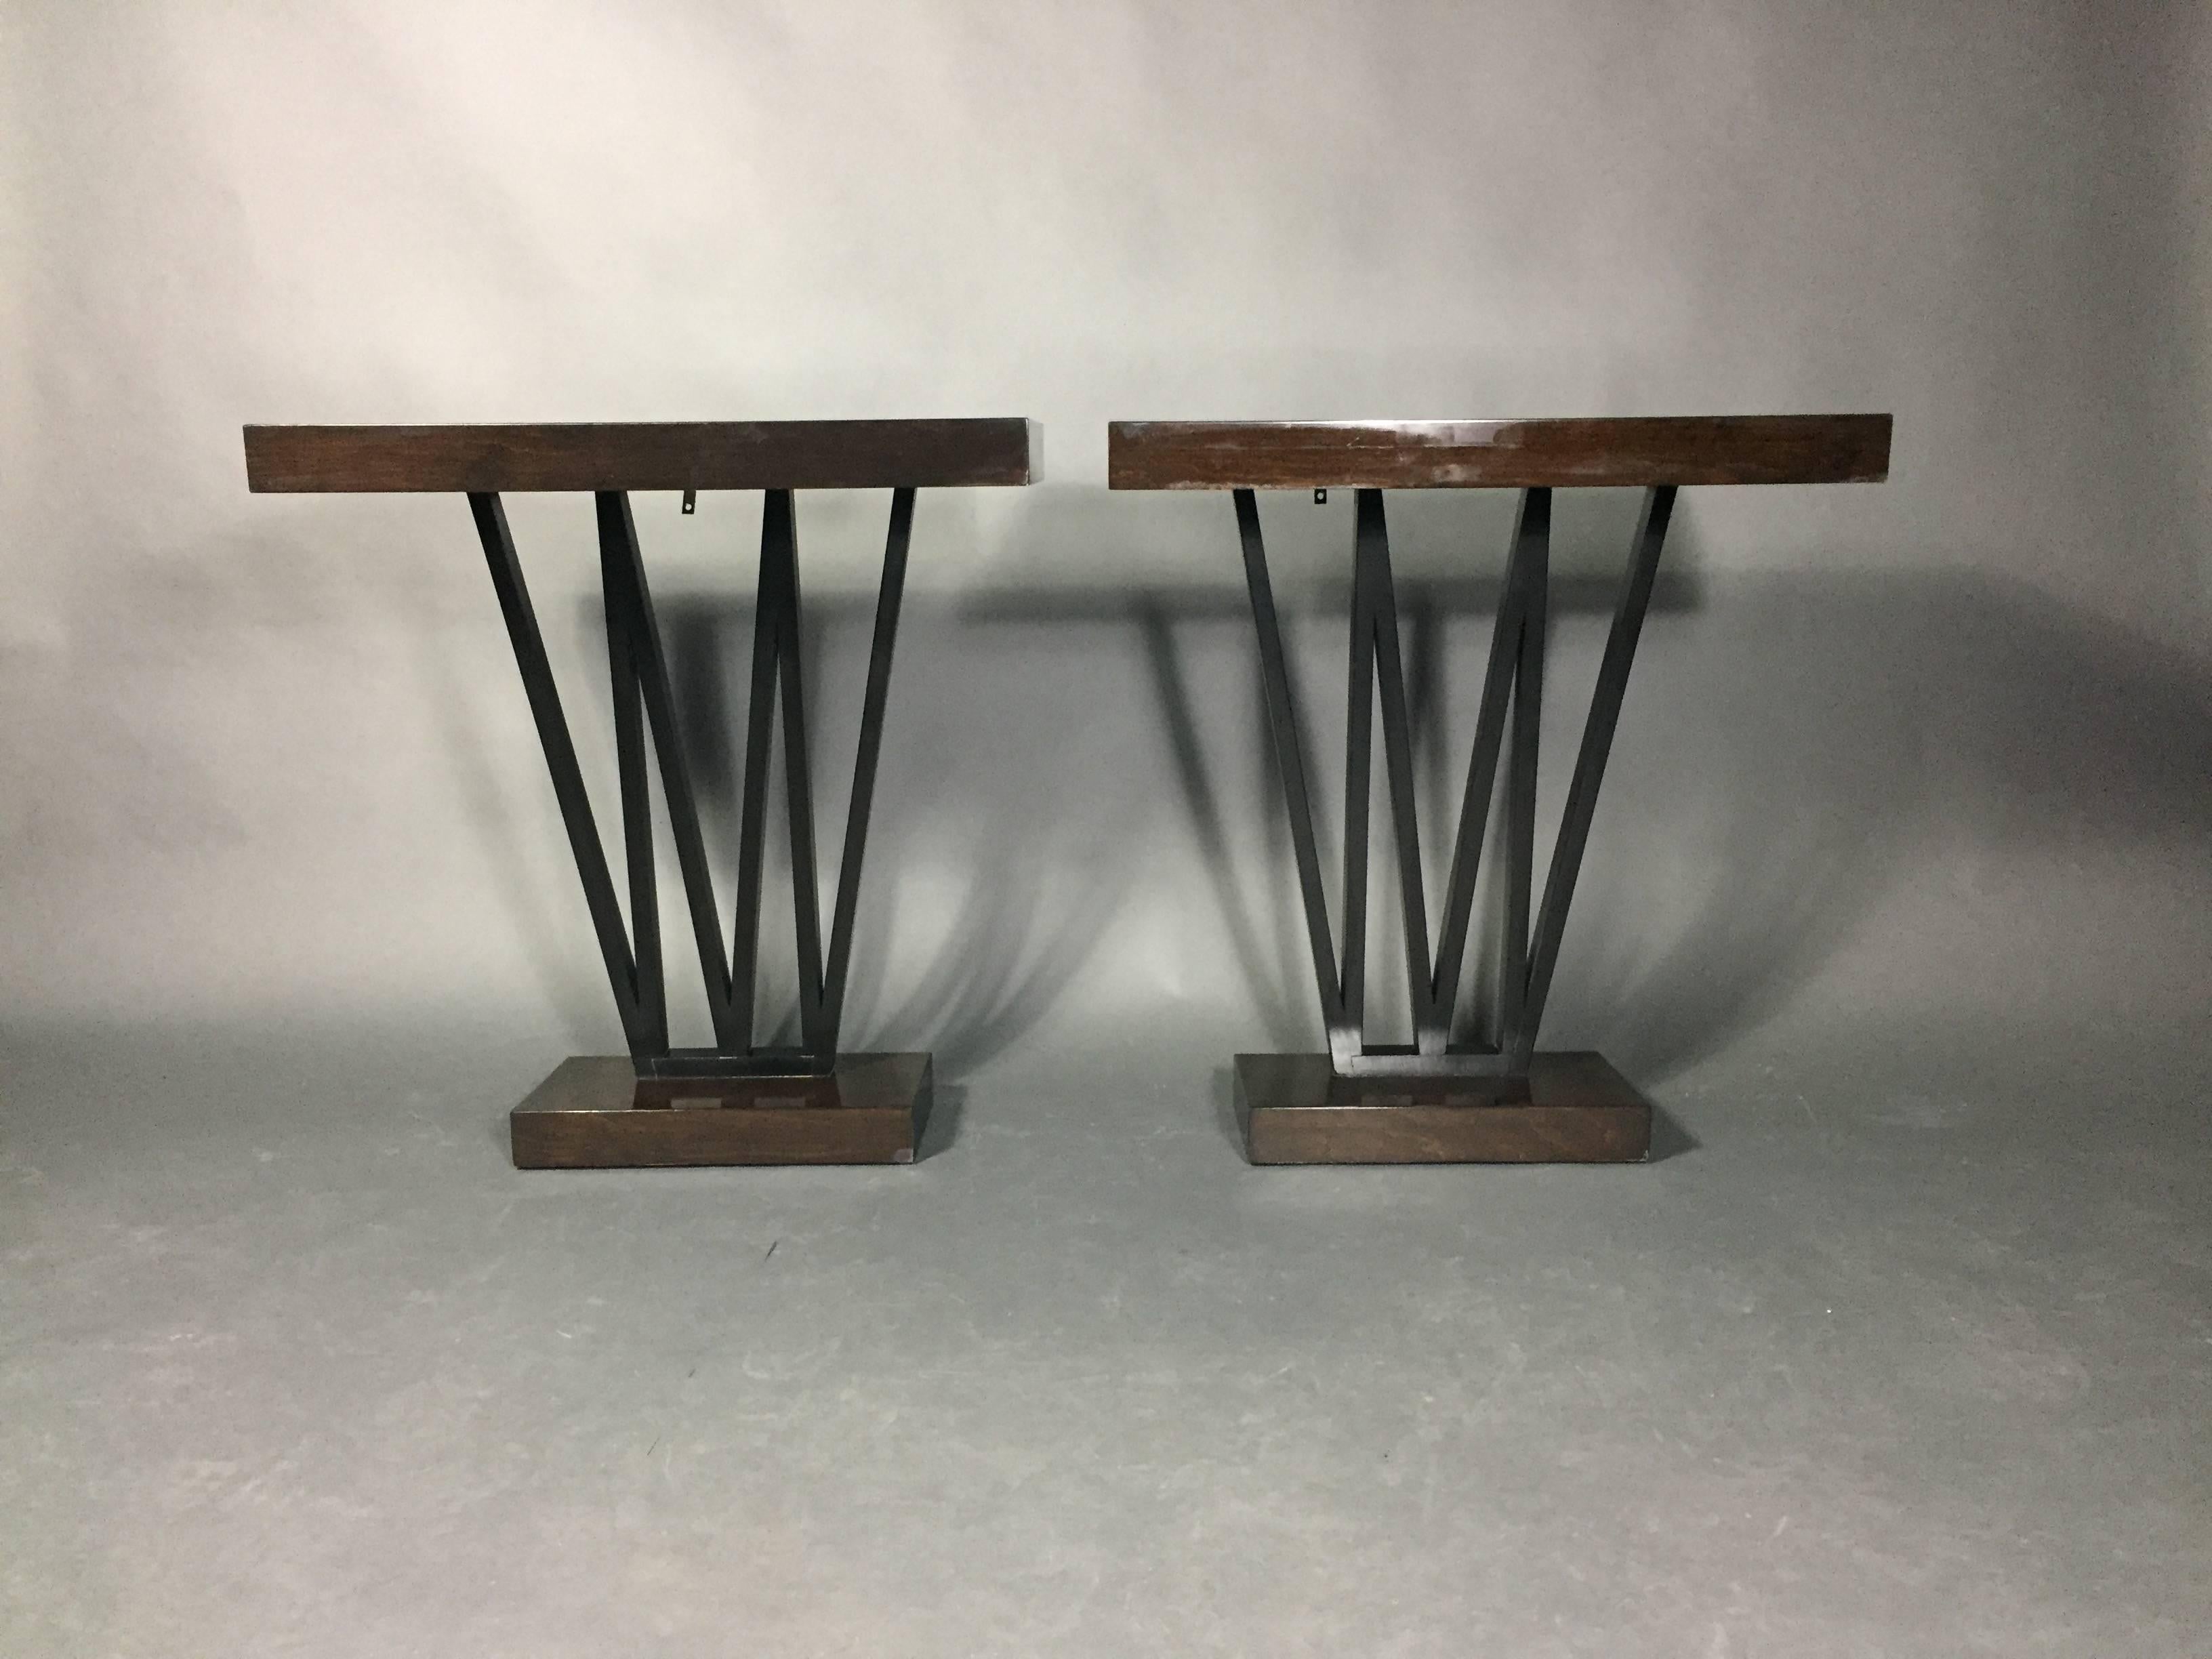 Firmly in the Art Deco tradition pair of console tables in dark stained and lacquered wood, each with a set of three V-shaped supports, USA, 1930s. Slight wobble to one table - both have a newer I-hook underneath at back to attach to wall for